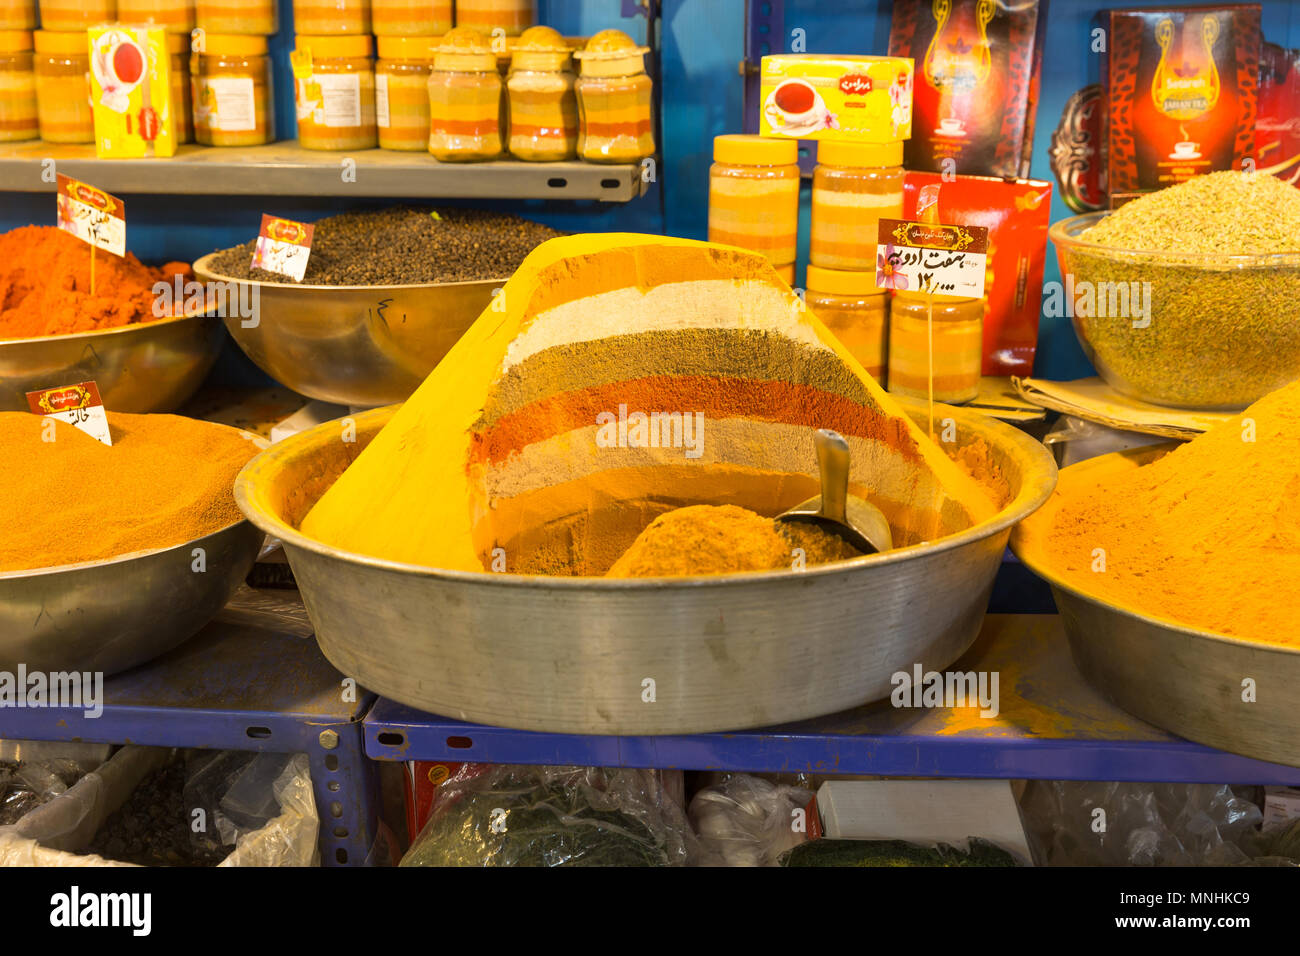 Spices at Bazaar of Isfahan in Naqsh-e Jahan Square, a historical market and one of the oldest and largest bazaars of the Middle East. Stock Photo